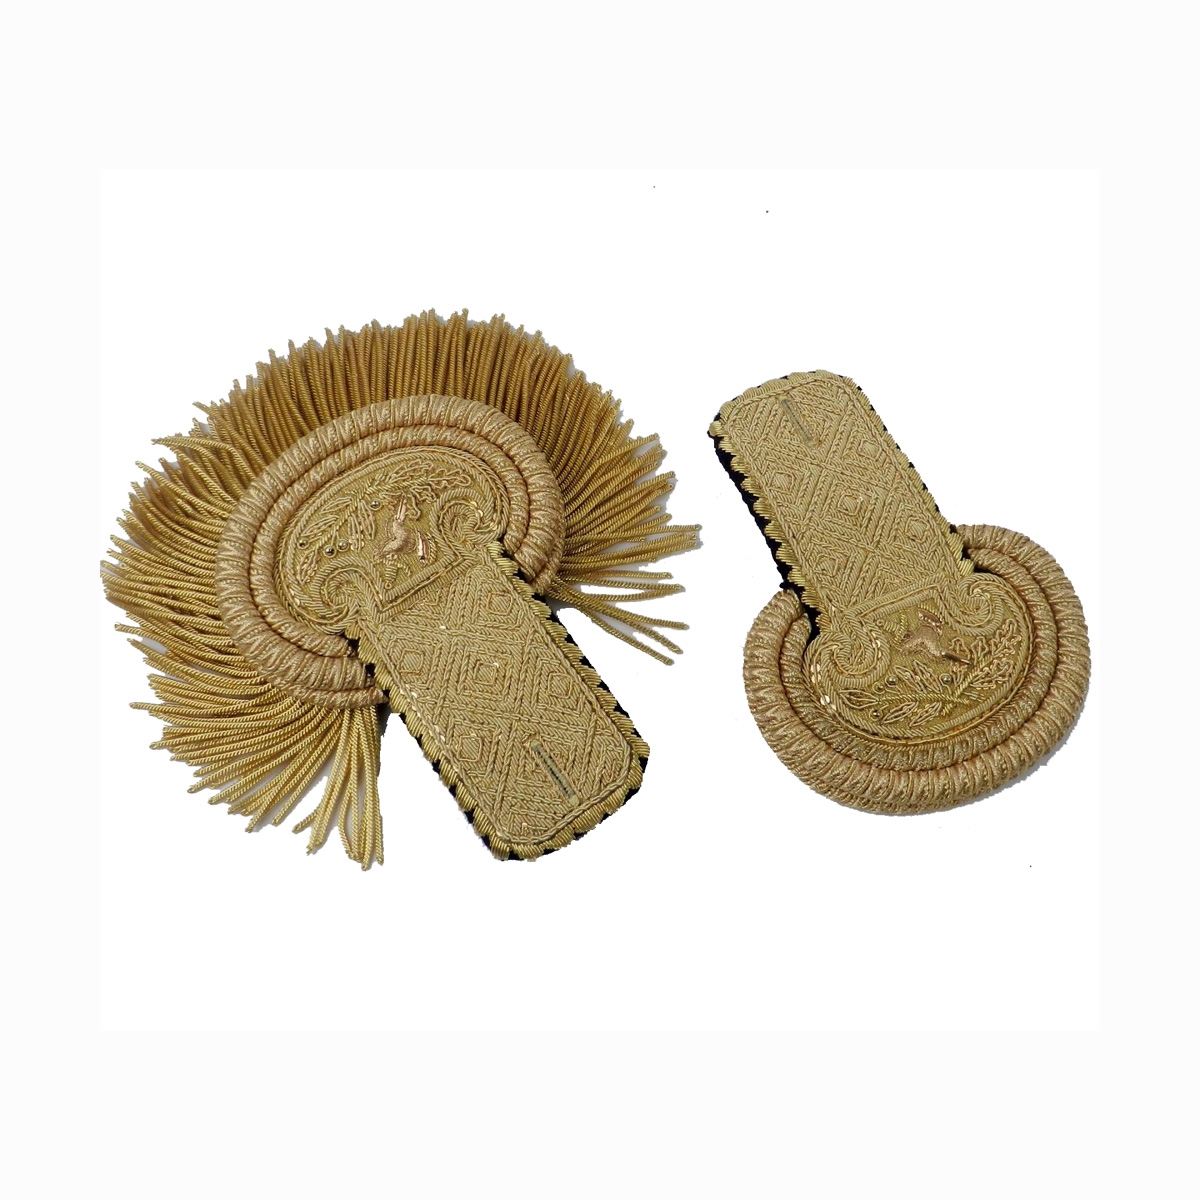 Staff Empire epaulettes (price by pair) hand embroidery bullion wire Uniforms Rank Epaulettes